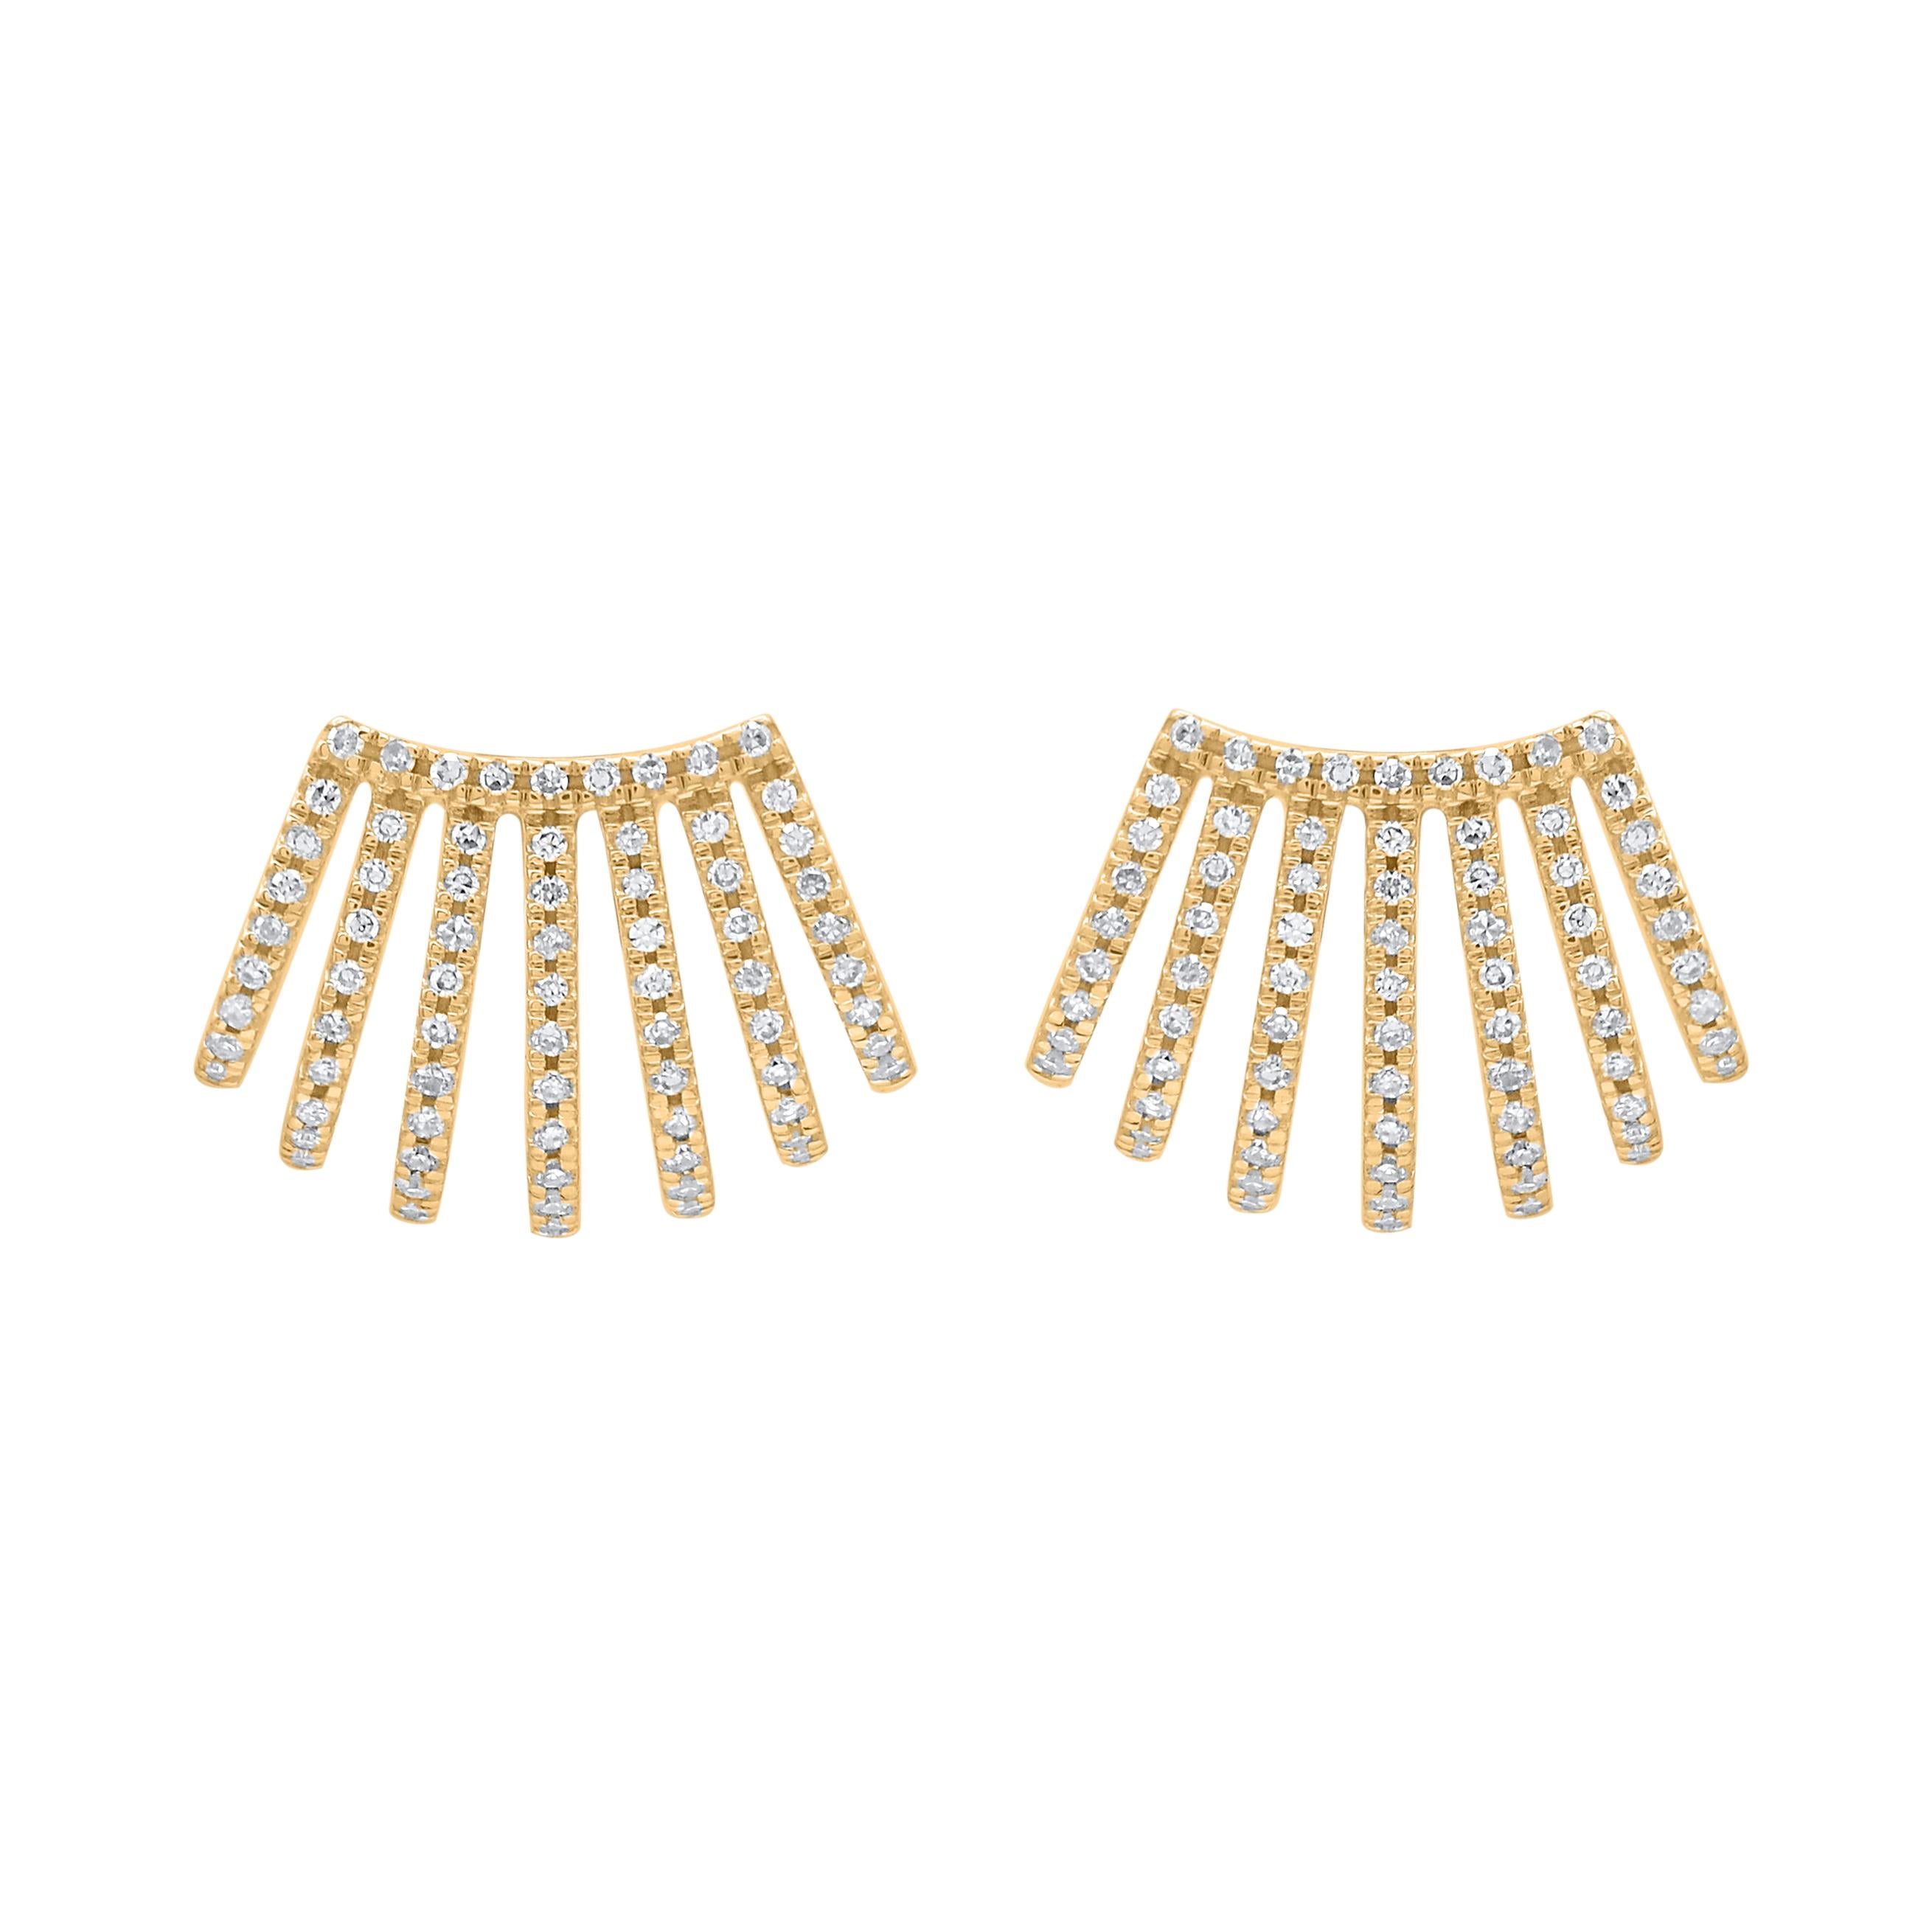 You'll adore the petite touch of shimmer these designer stud earrings add to your attire. Beautifully hand-crafted by our inhouse experts in 14 karat yellow gold and embellished with 146 round diamonds set in prong setting and shimmers with H-I